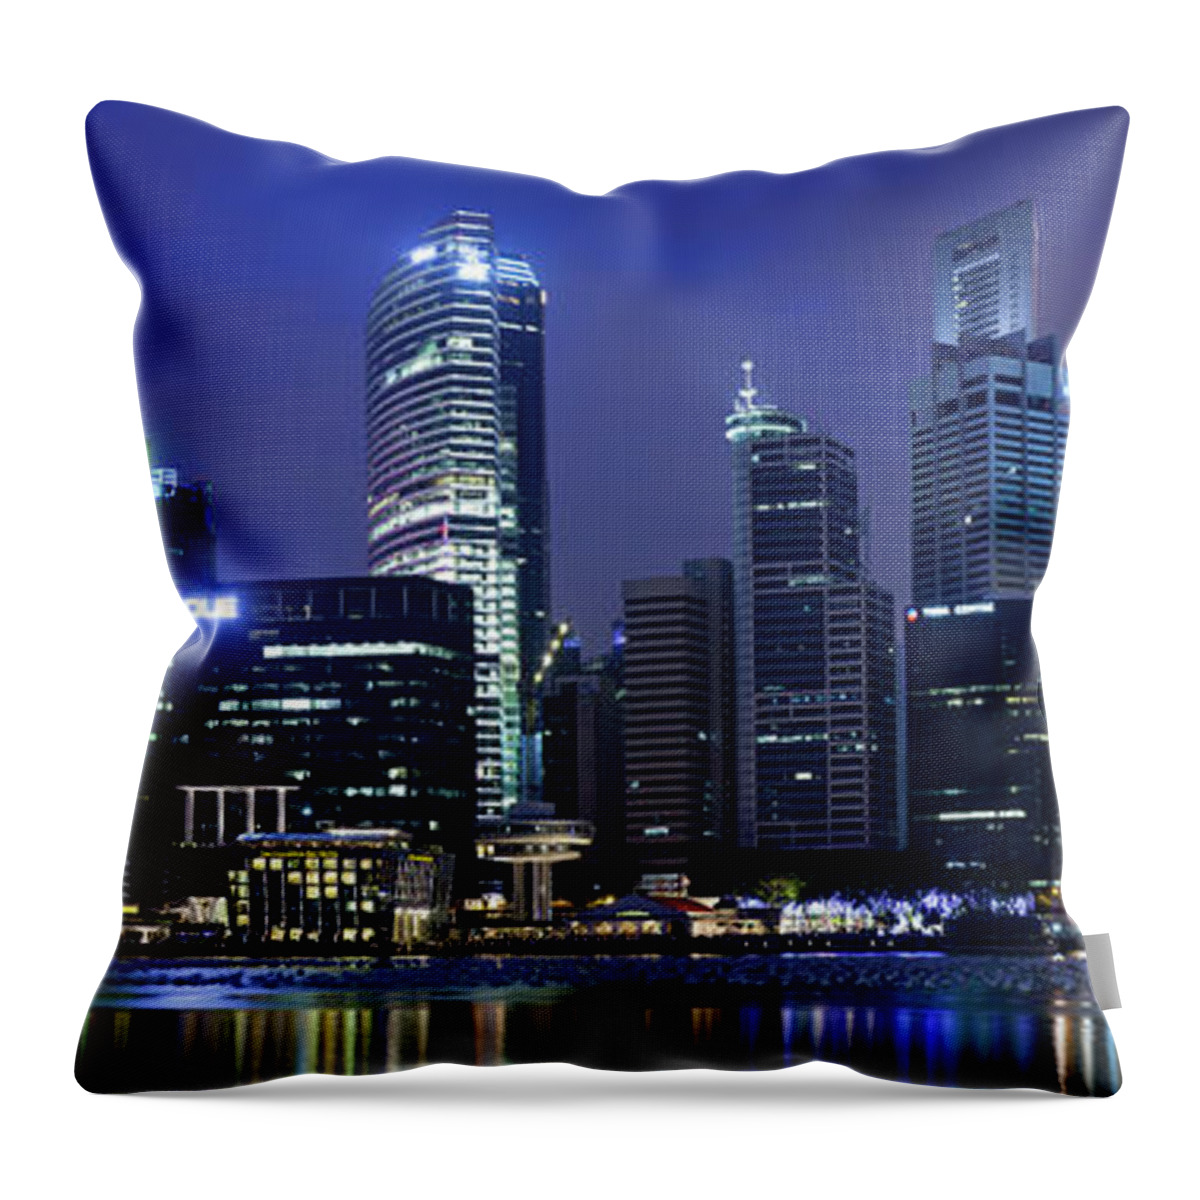 Panoramic Throw Pillow featuring the photograph Central Business District, Singapore by David Clapp